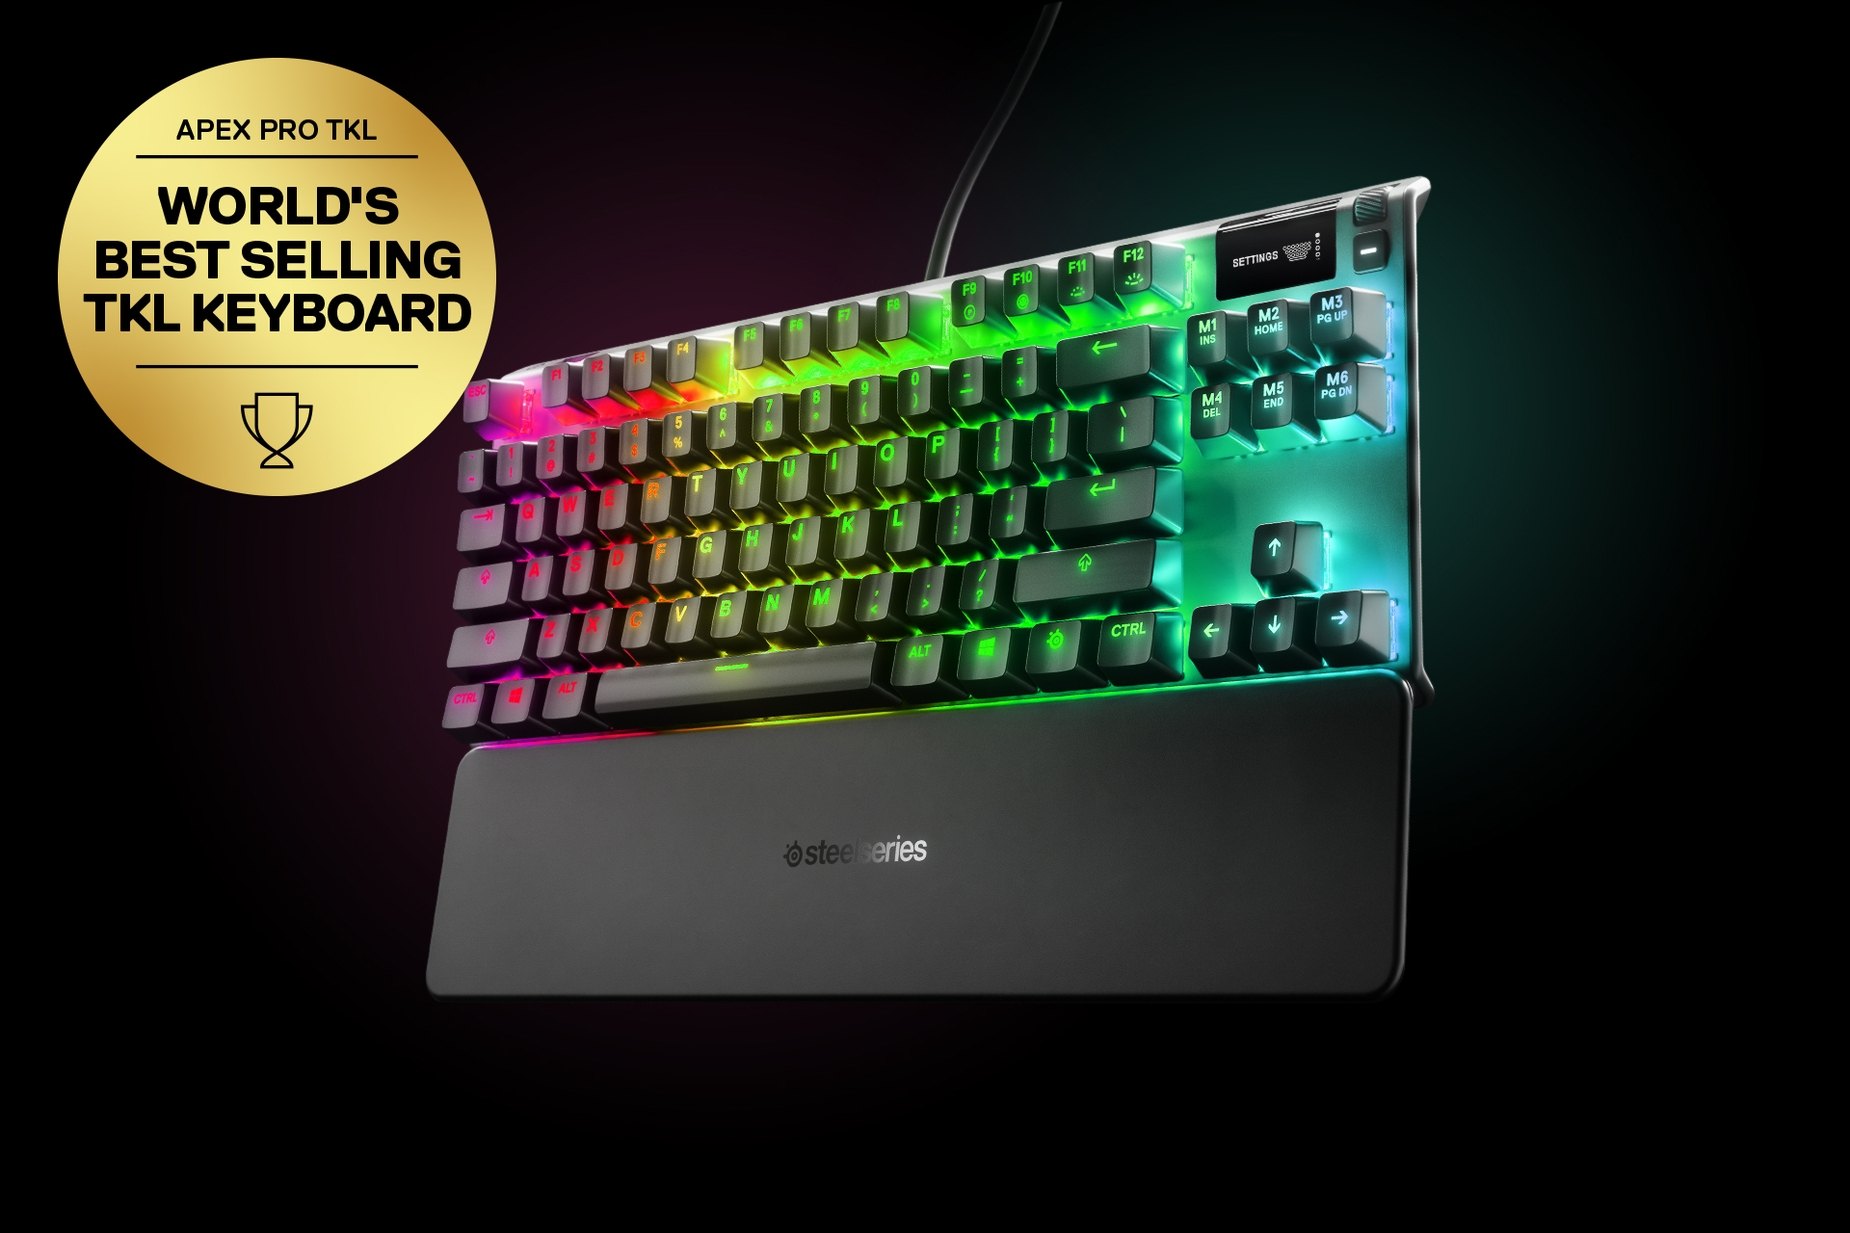 
 German - Apex Pro TKL gaming keyboard with the illumination lit up on dark background, also shows the OLED screen and controls used to change settings, switch actuation, and adjust audio. Keyboard has gold award floating next to it with text "World's best selling TKL Keyboard".
 